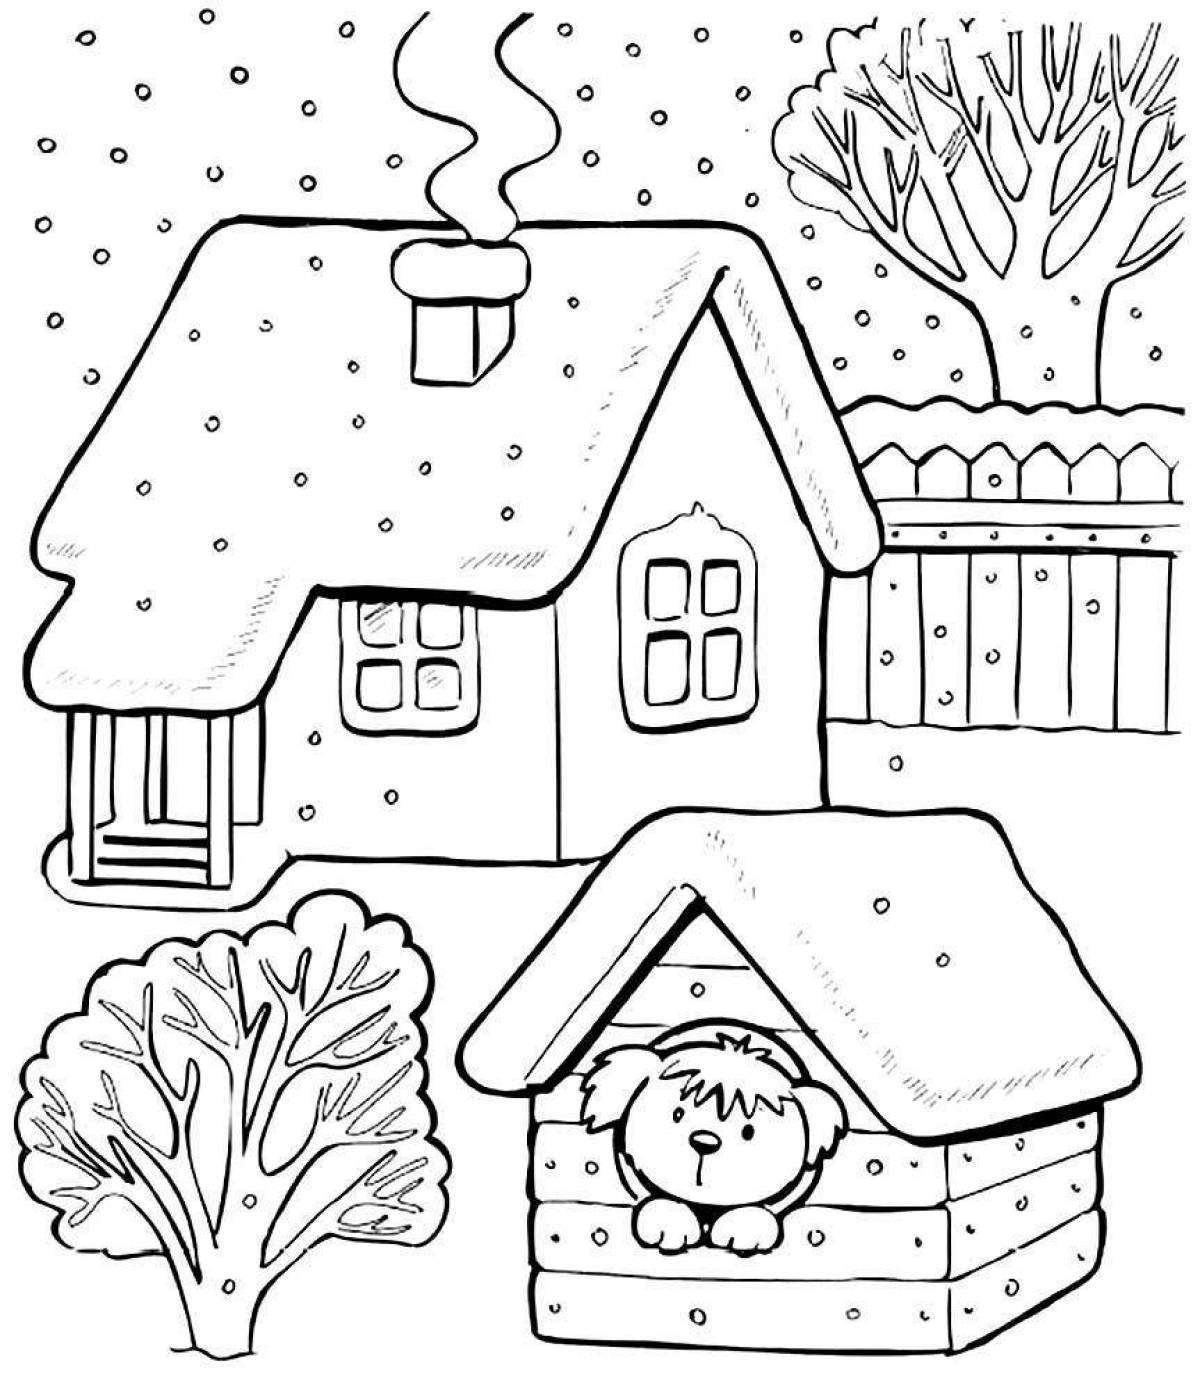 Amazing winter coloring book for kids 5 years old